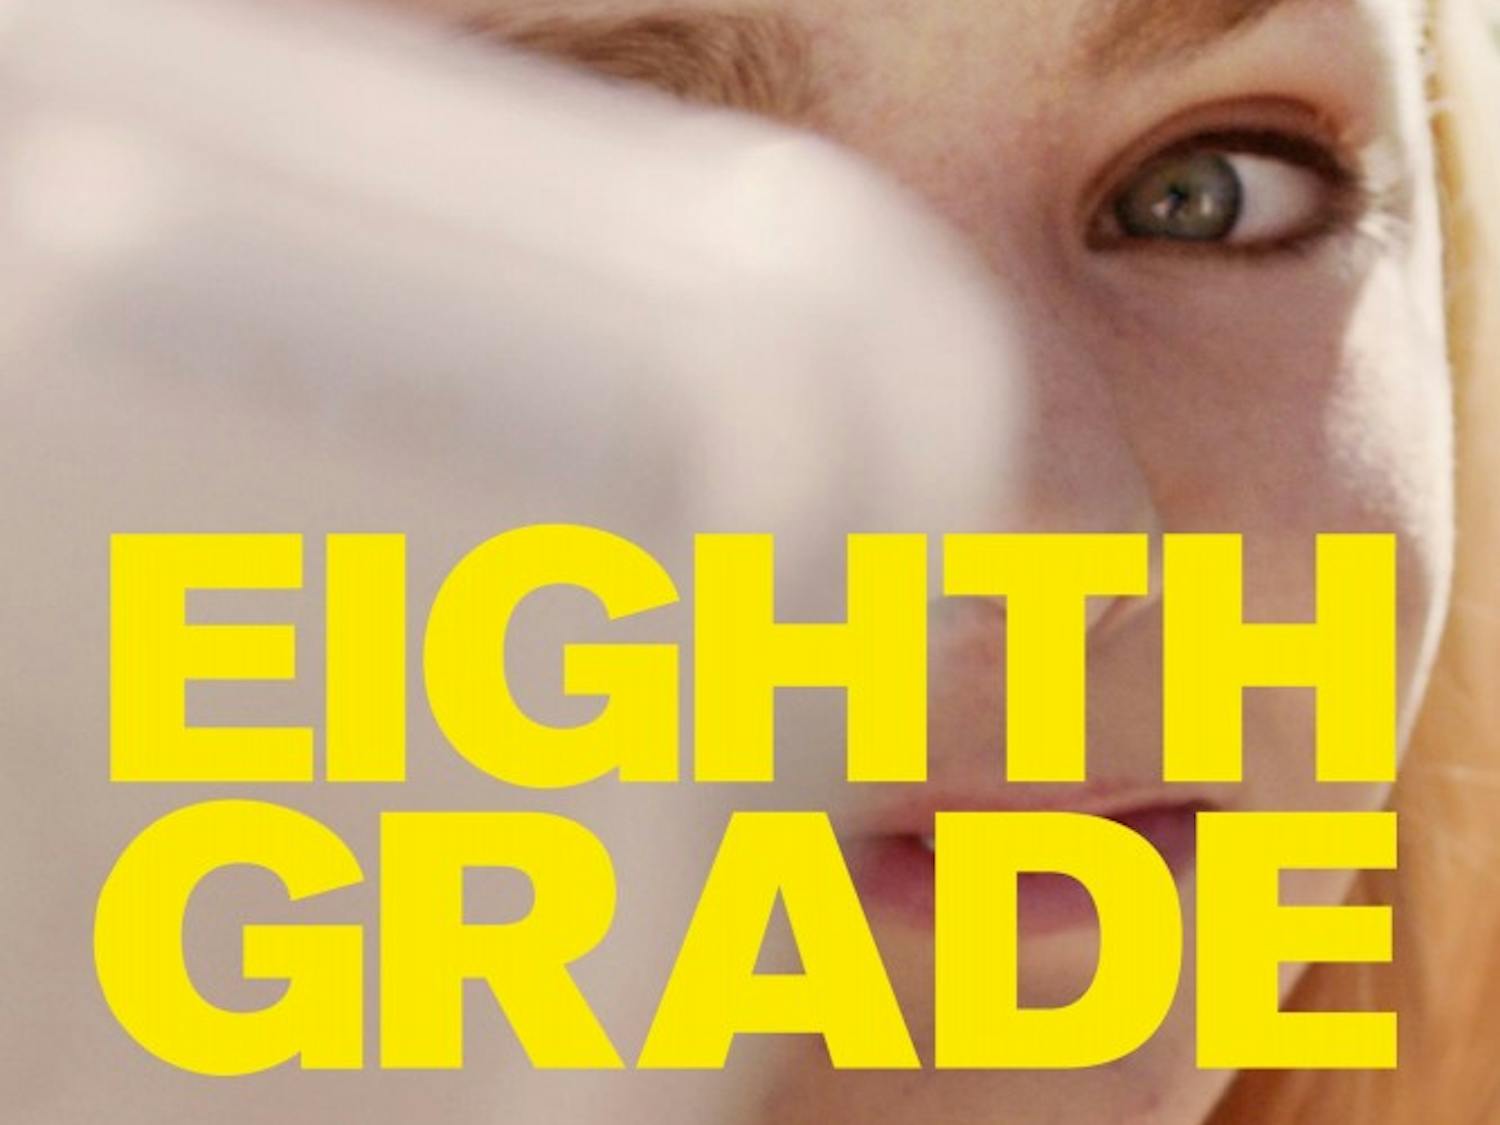 Burnham's directorial debut is a comical take on today's generation of teens.&nbsp;